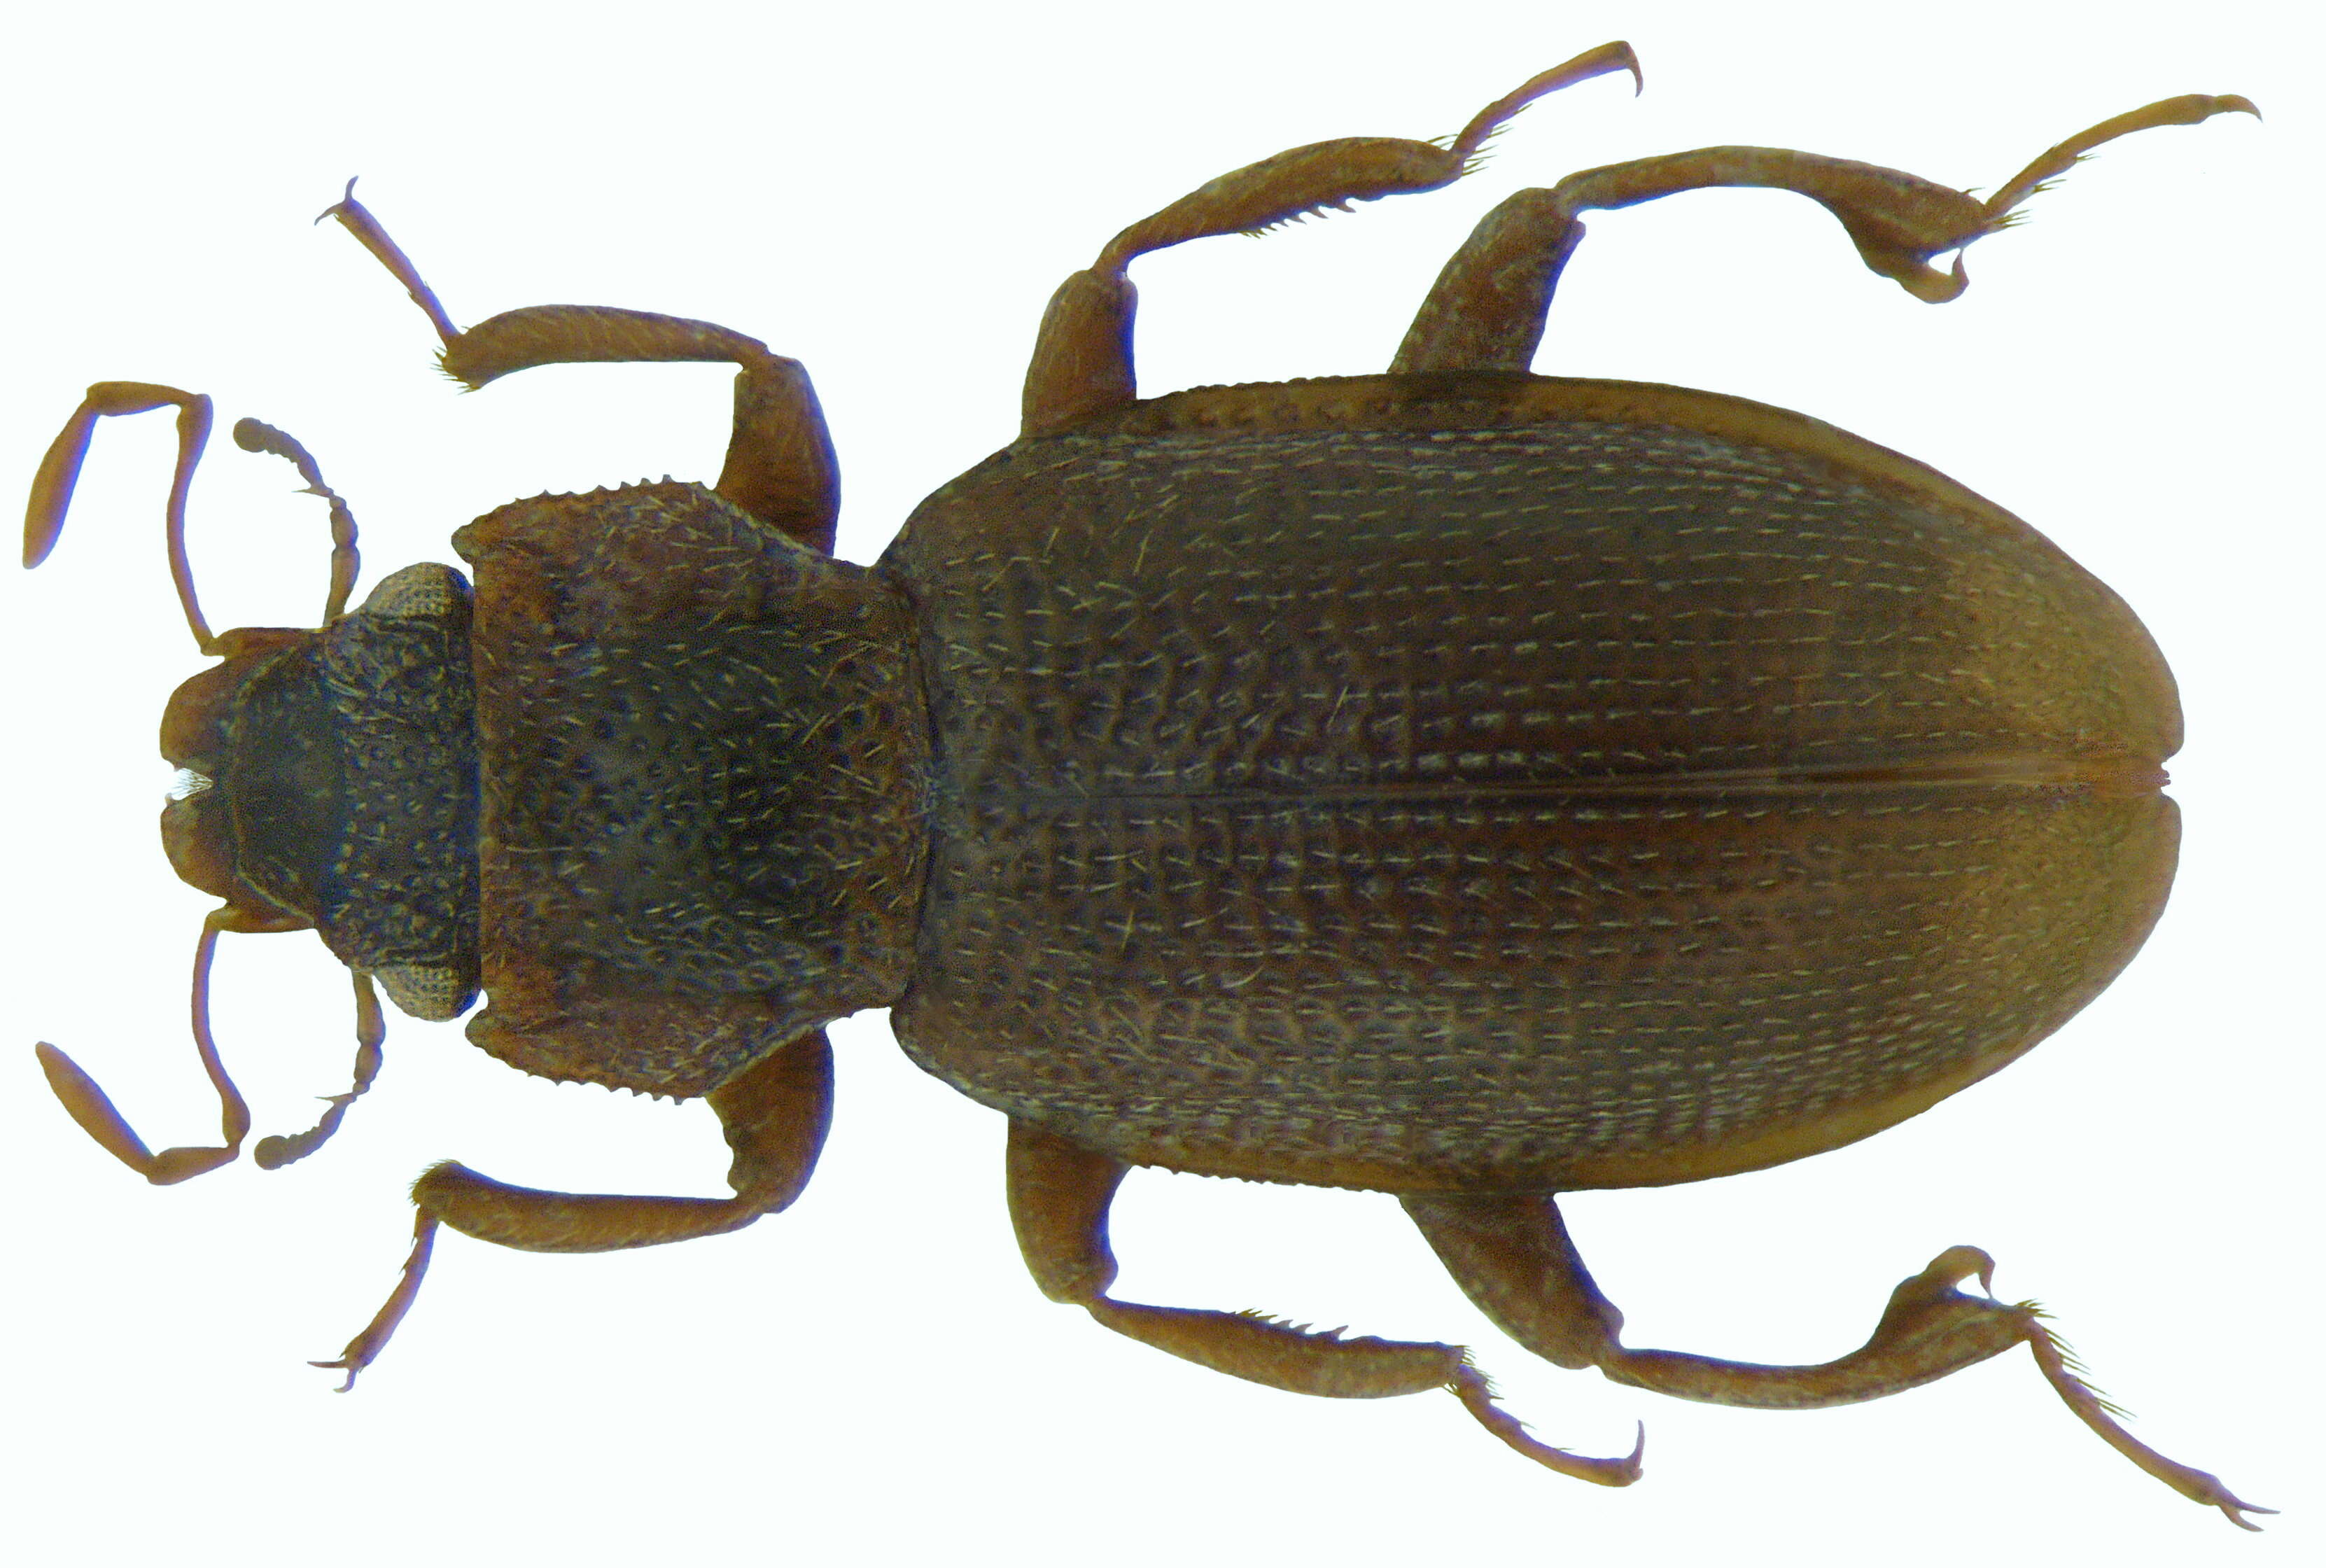 Image of minute moss beetle